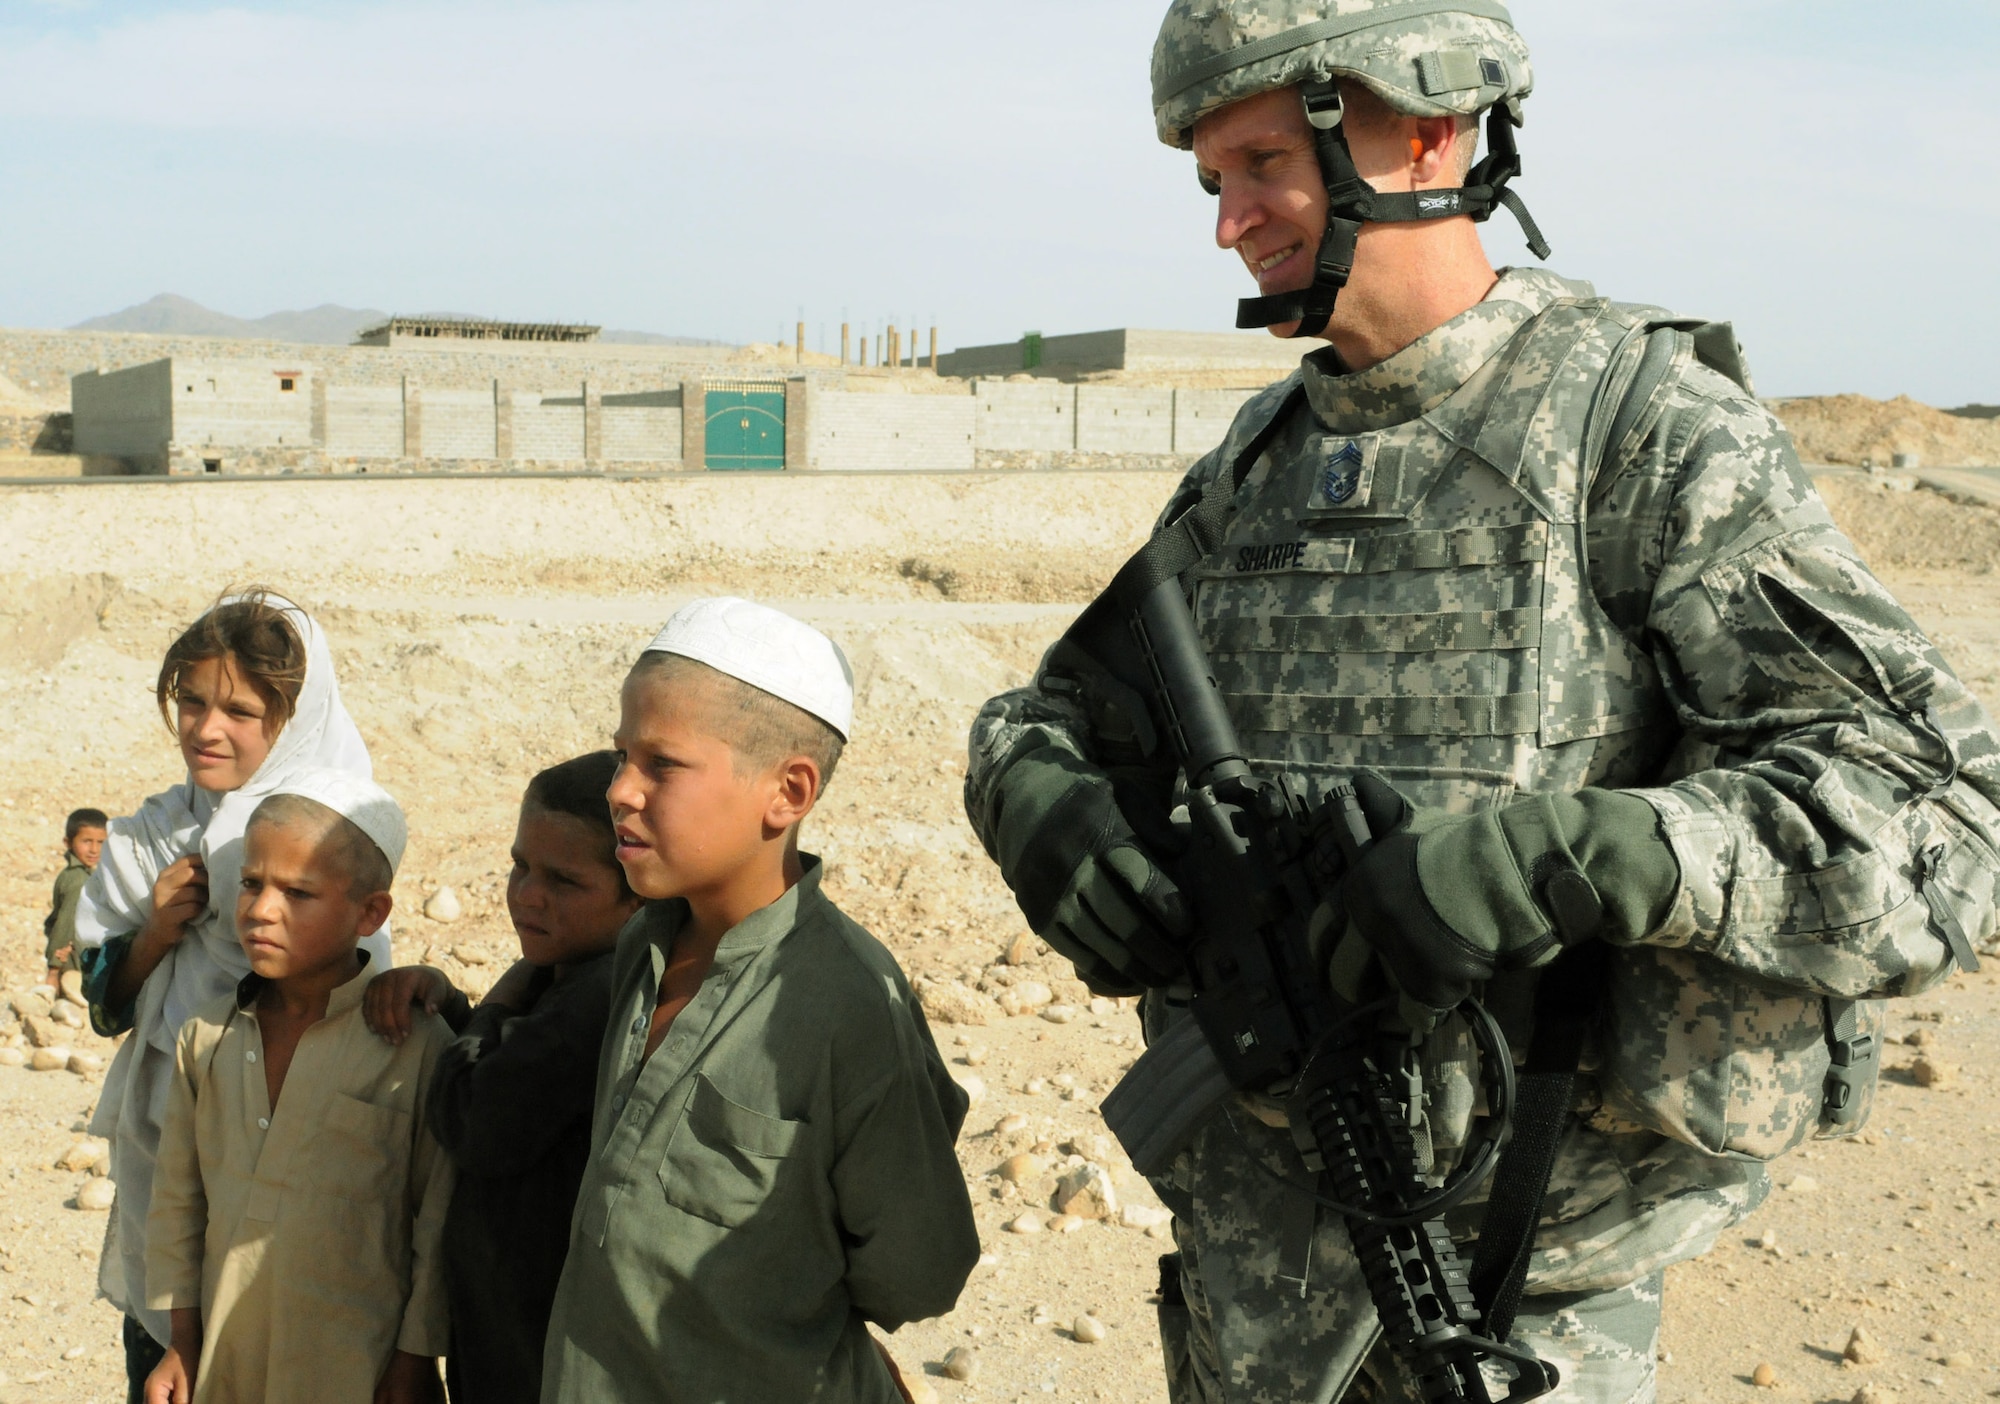 Chief Master Sgt. Bud Sharpe, 36th Civil Engineer Squadron superintendent, gets to know Afghan children in the Metar Lam Province, Afghanistan in late May 2010 after completing work on a new schoolhouse for children in the local villages. (U.S. Air Force Courtesy Photo) 